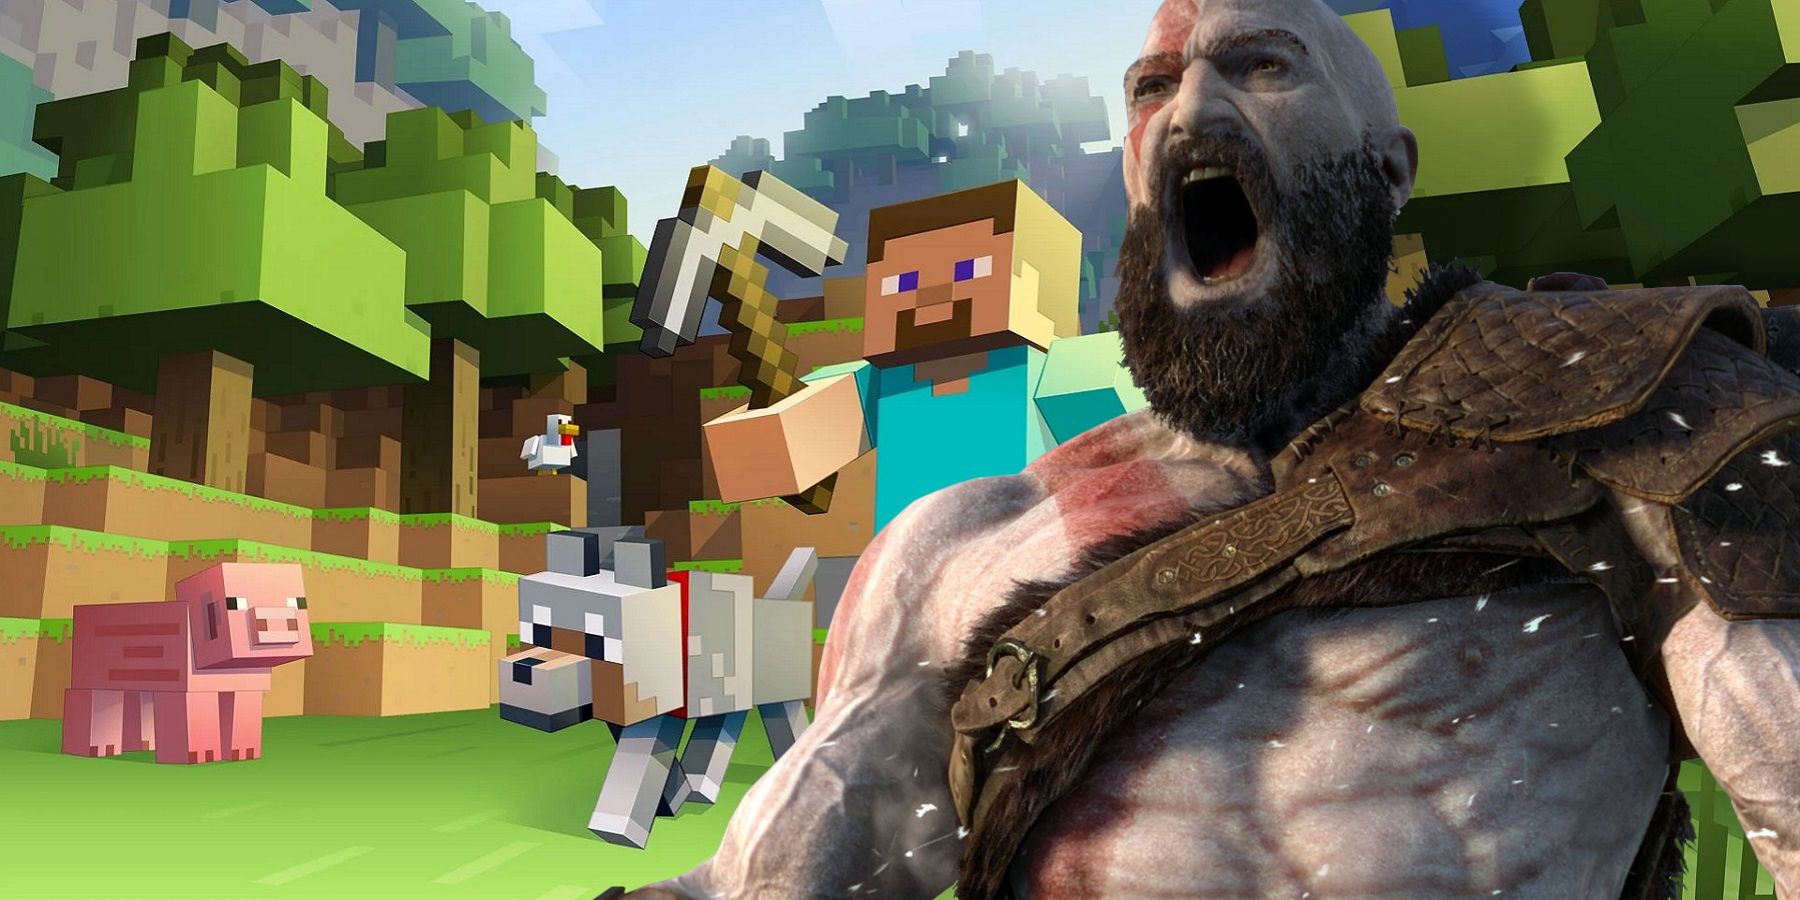 Image from Minecraft with God of War's Kratos yelling in the foreground.